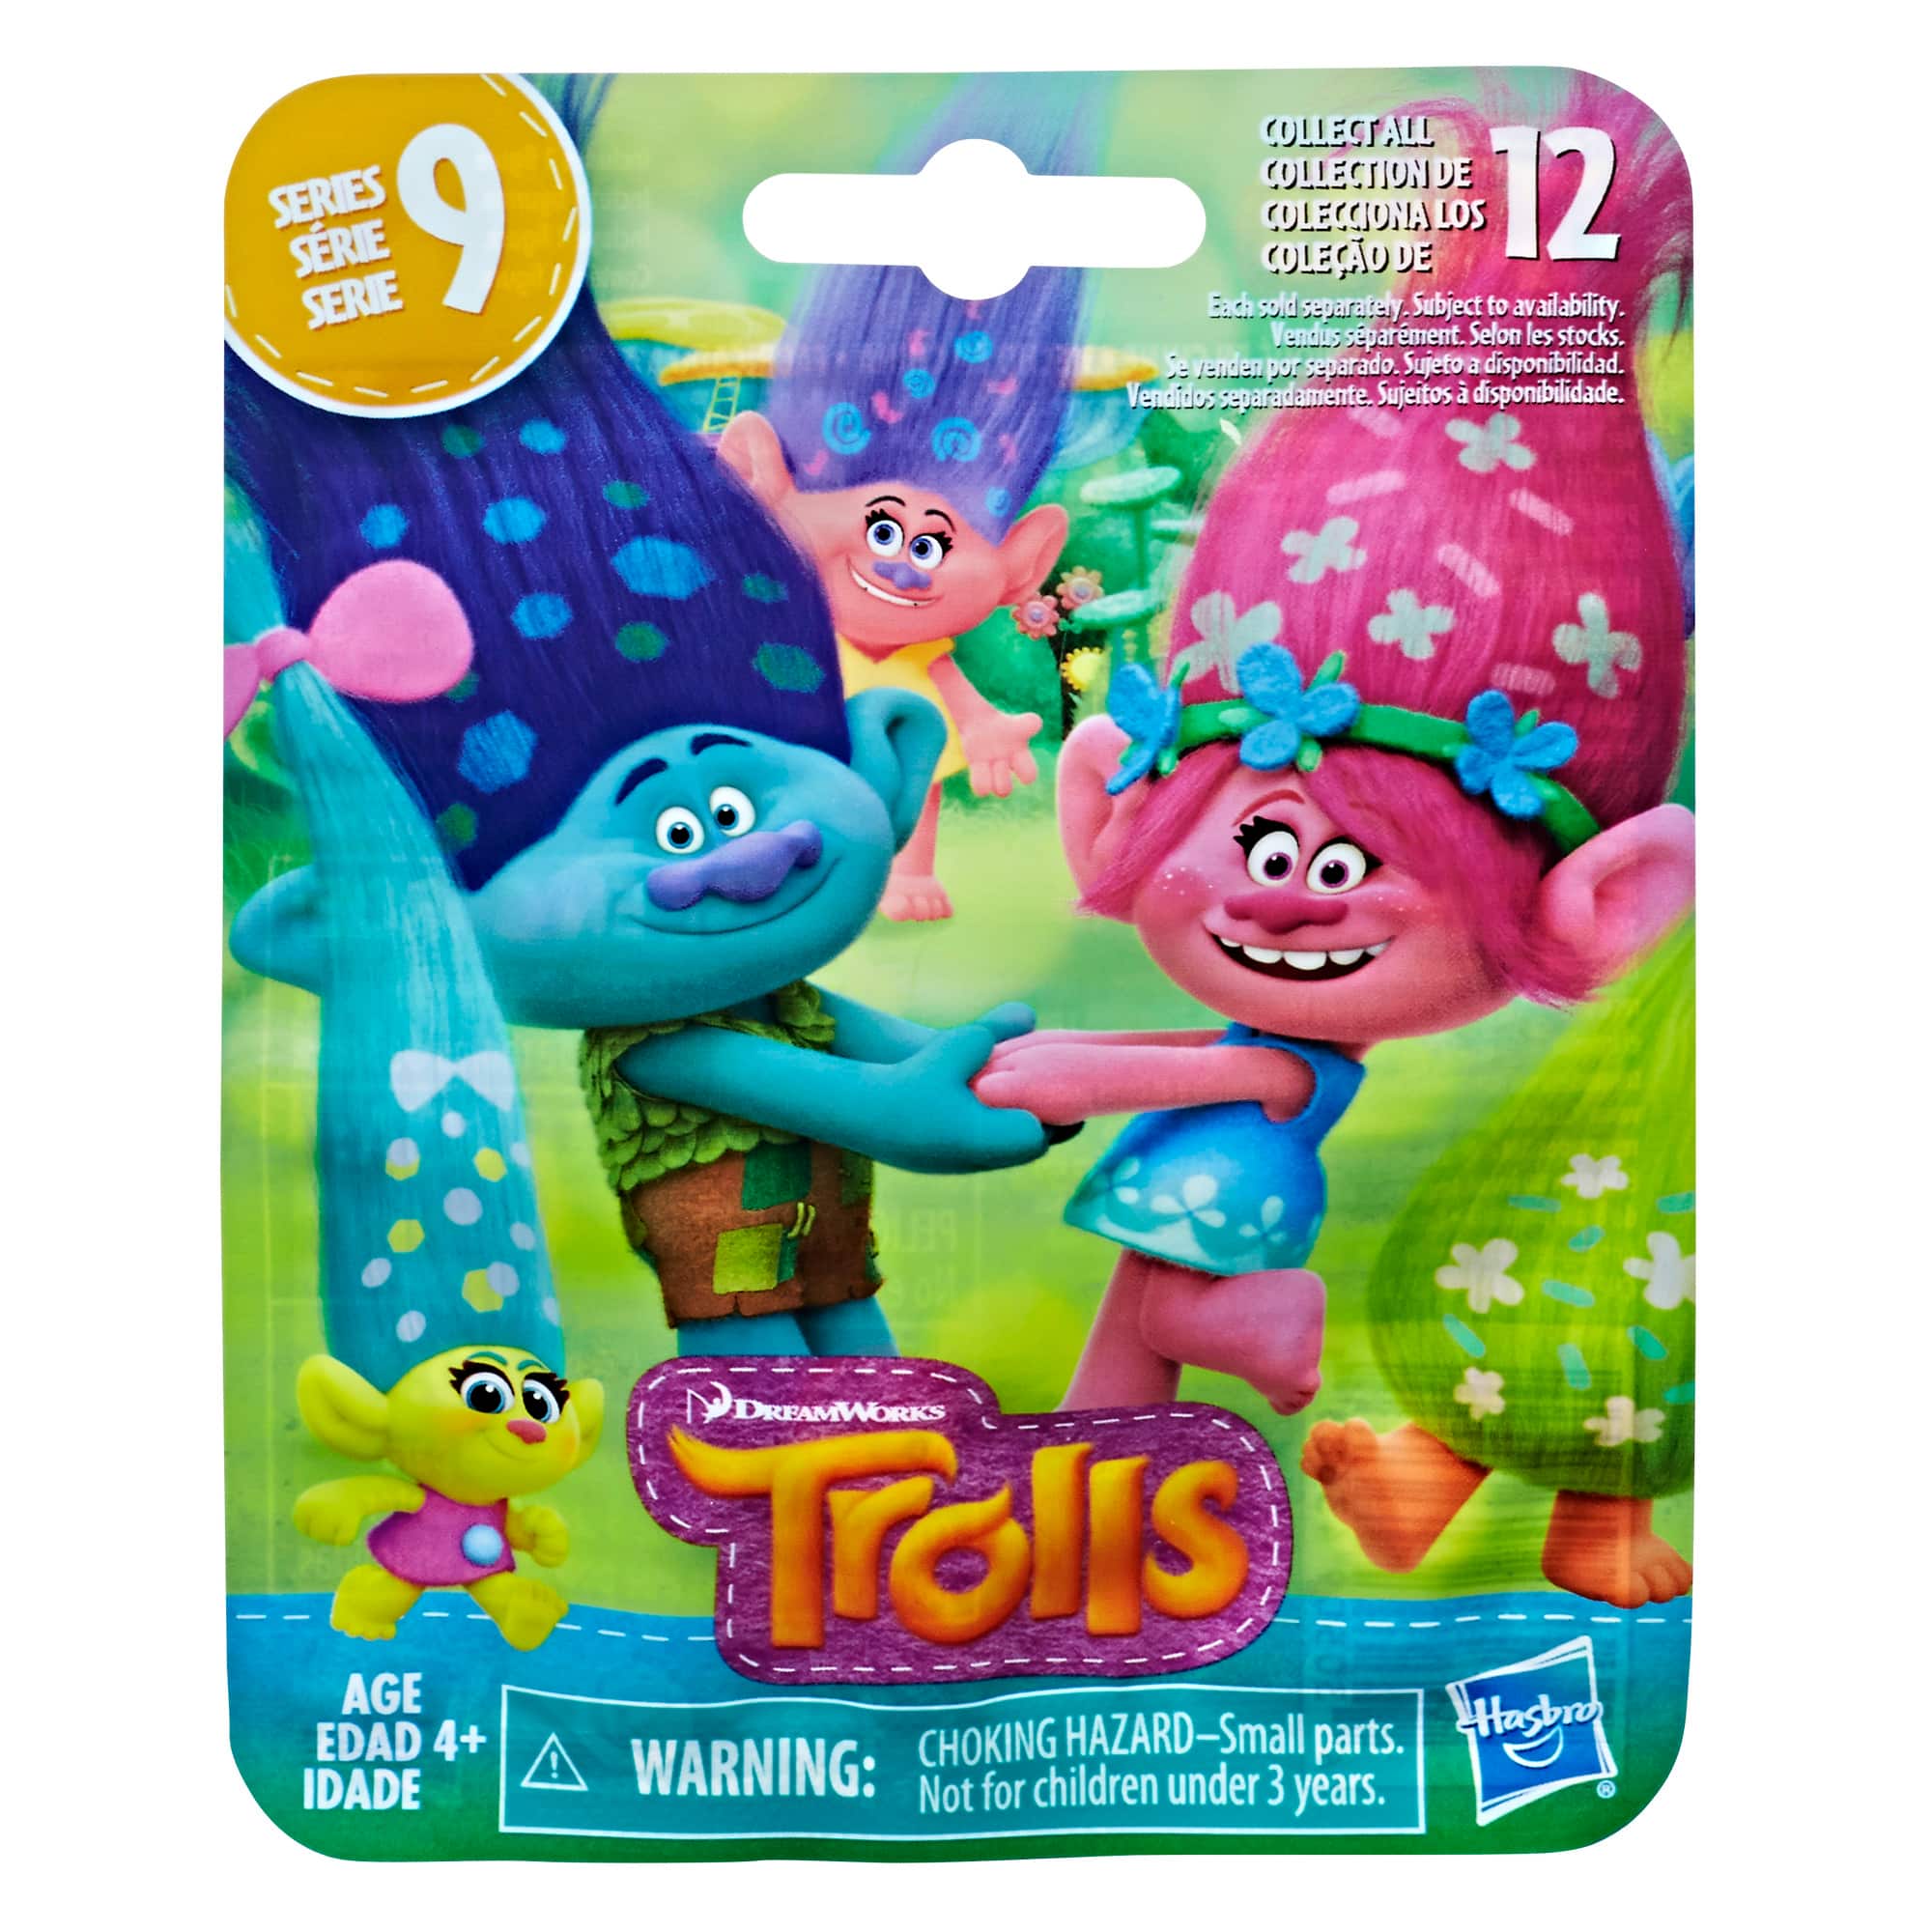 Find the DreamWorks Trolls Series 9 Small Blind Pack at Michaels